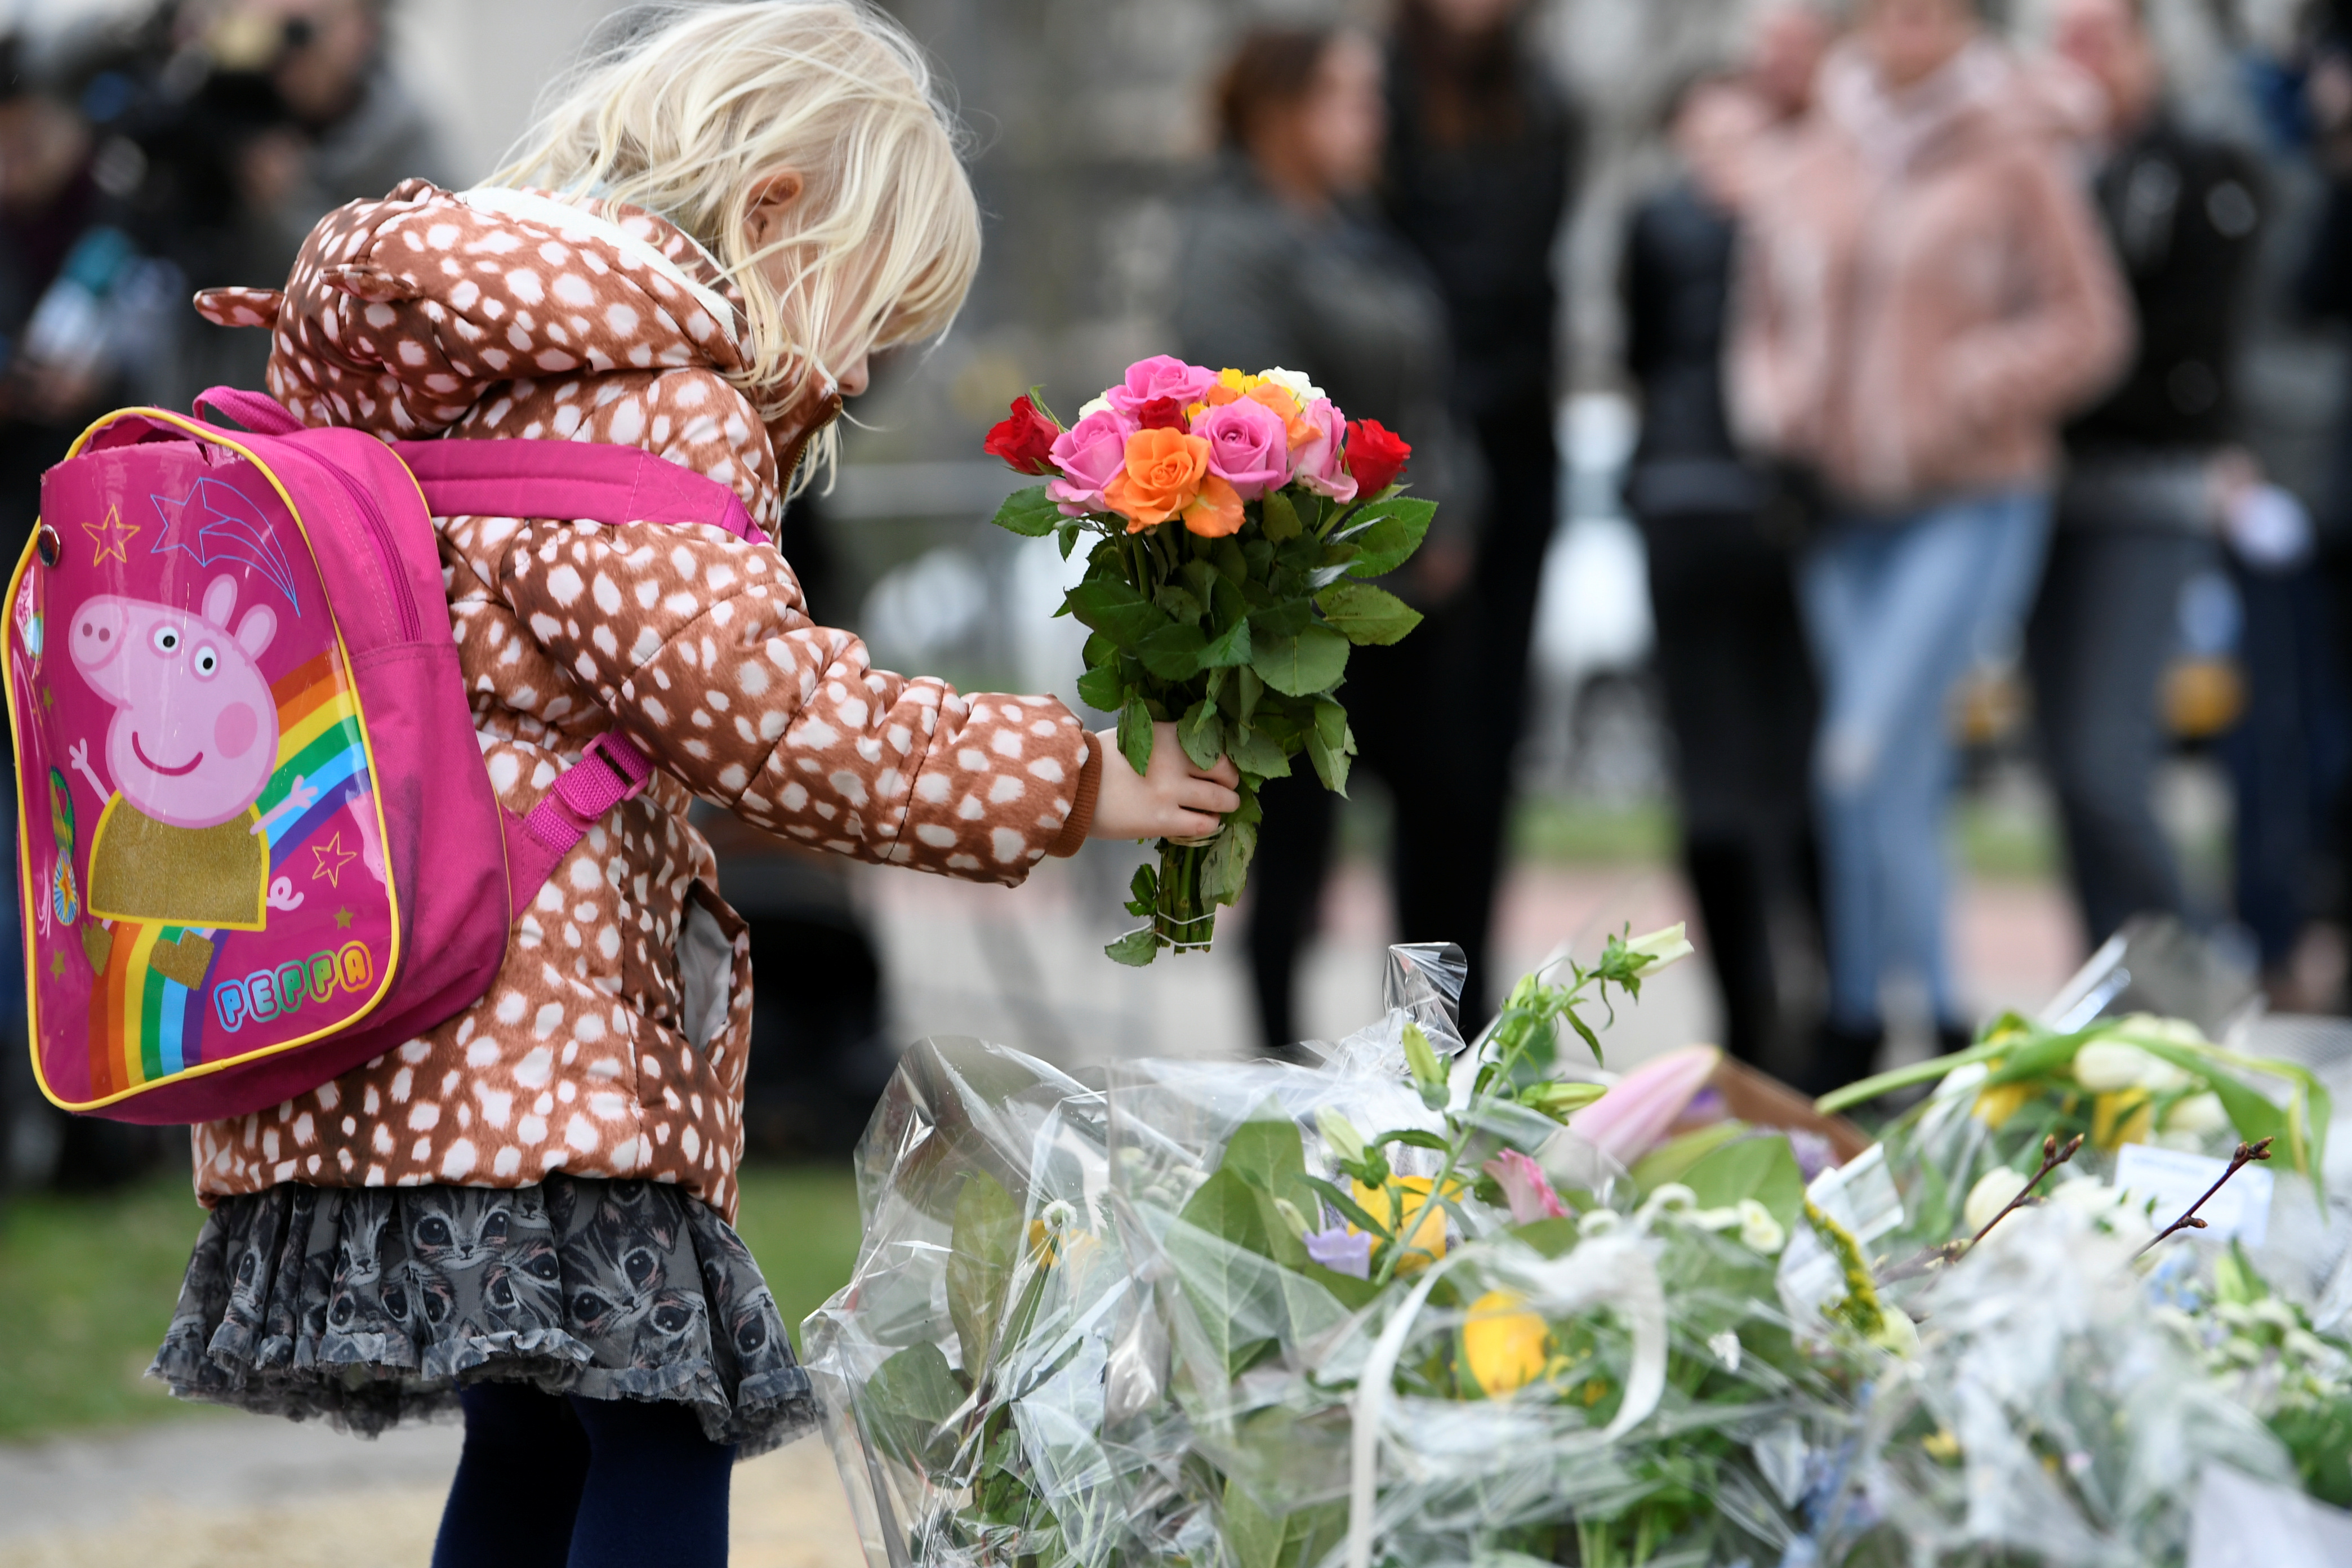 A child places flowers at a makeshift memorial at the site of a tram shooting in Utrecht, Netherlands March 19, 2019. REUTERS/Piroschka van de Wouw